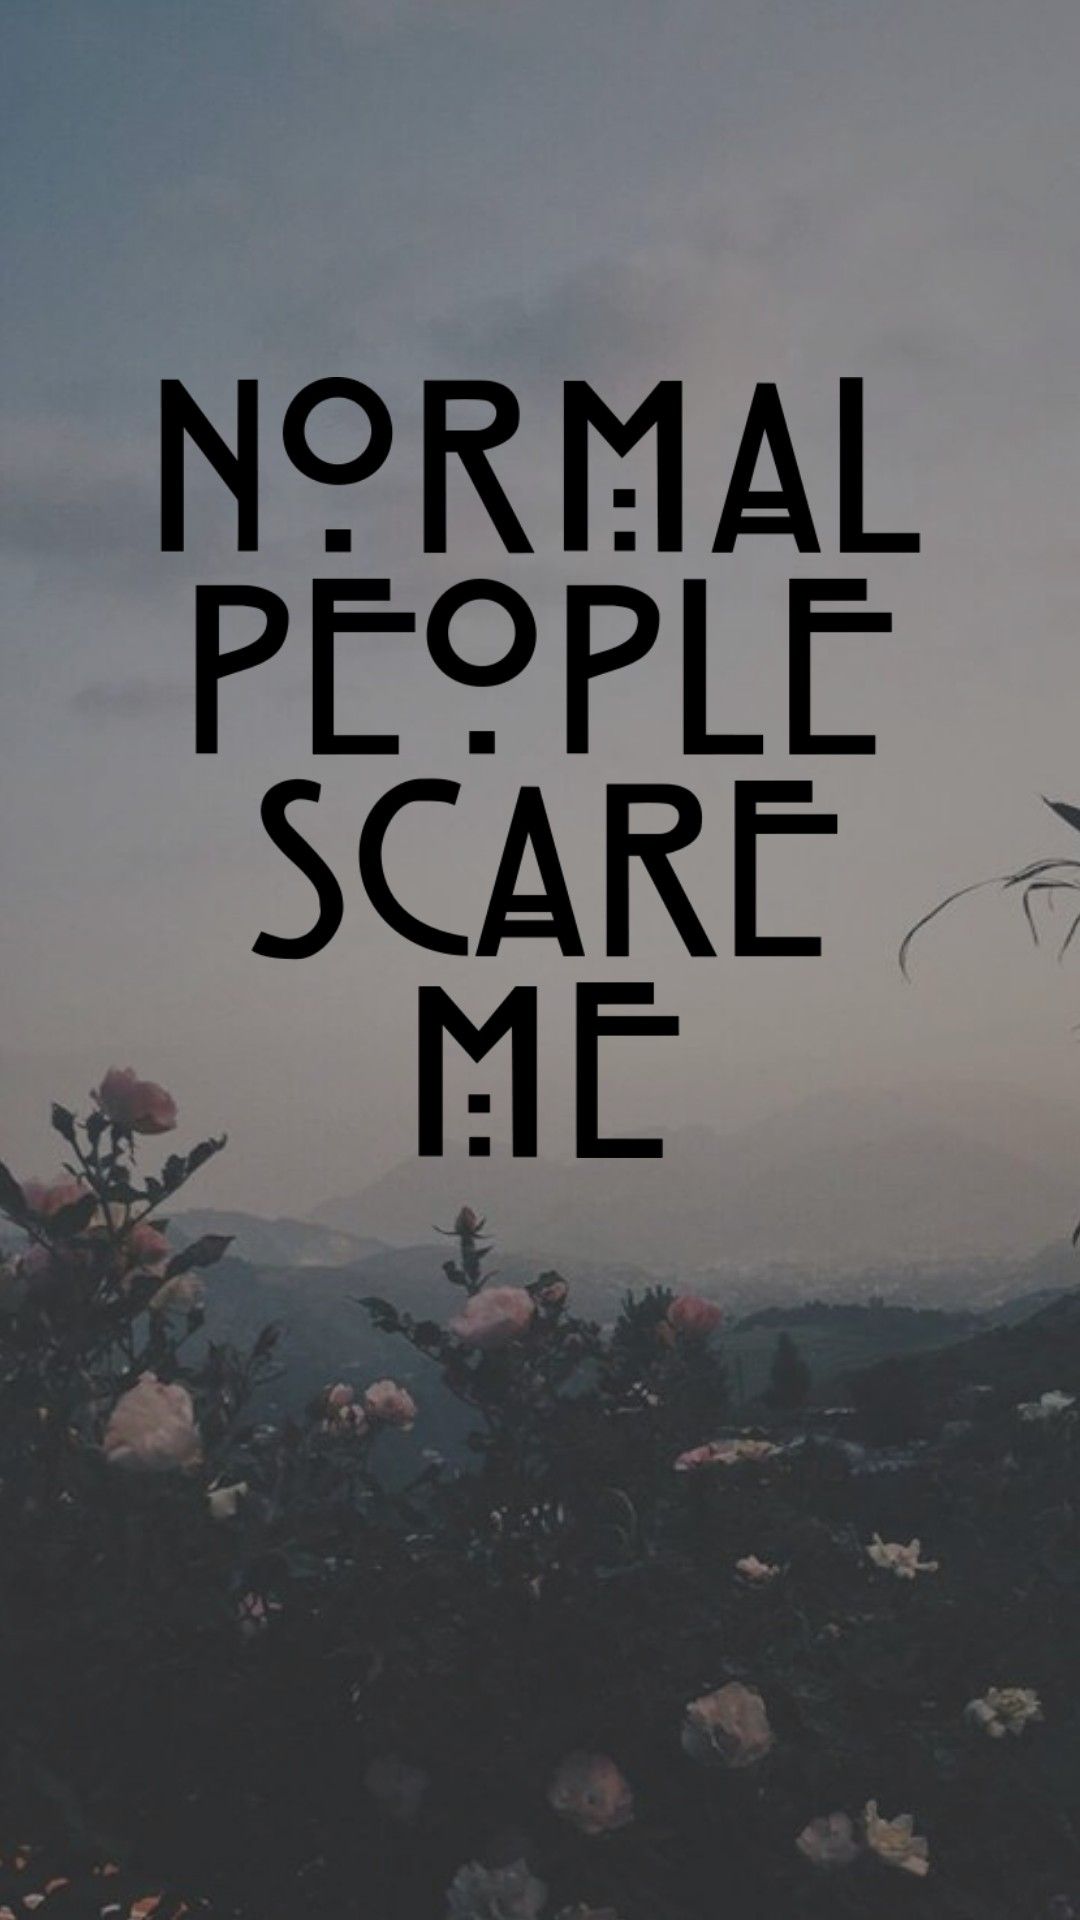 Aesthetic Normal People Scare Me , HD Wallpaper & Backgrounds